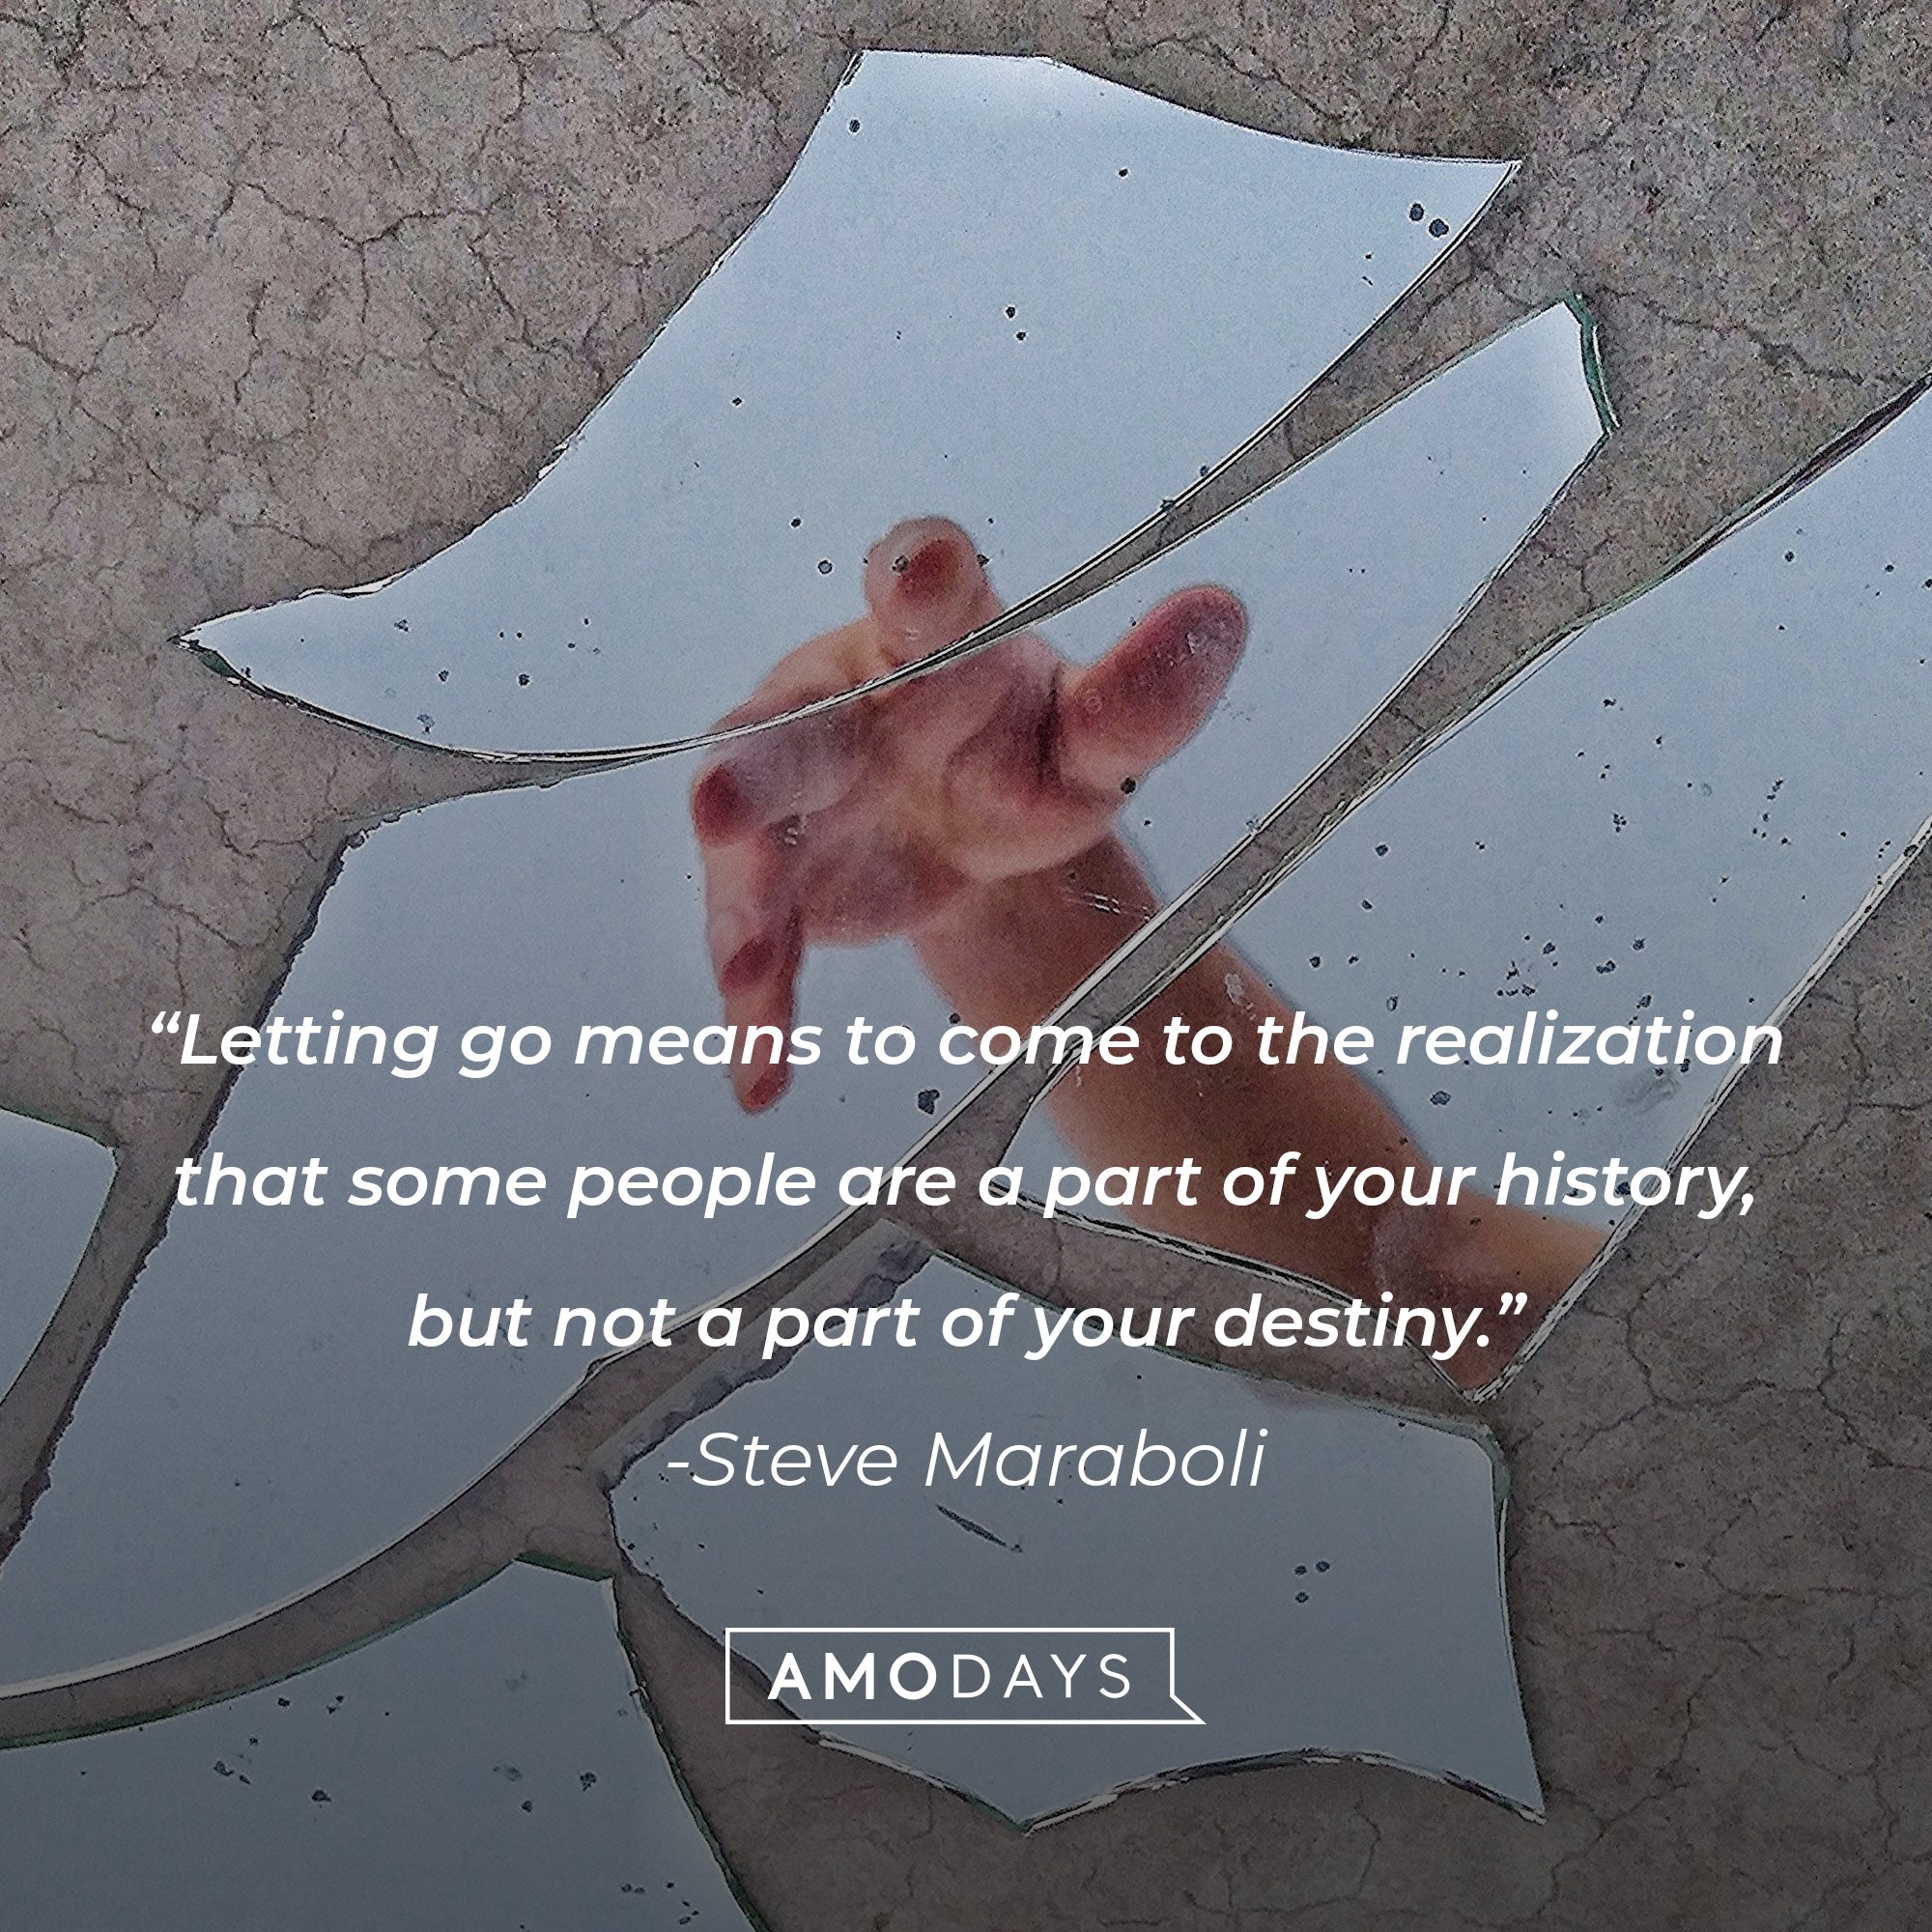 Steve Maraboli's quote: “Letting go means to come to the realization that some people are a part of your history, but not a part of your destiny.” | Image: AmoDays